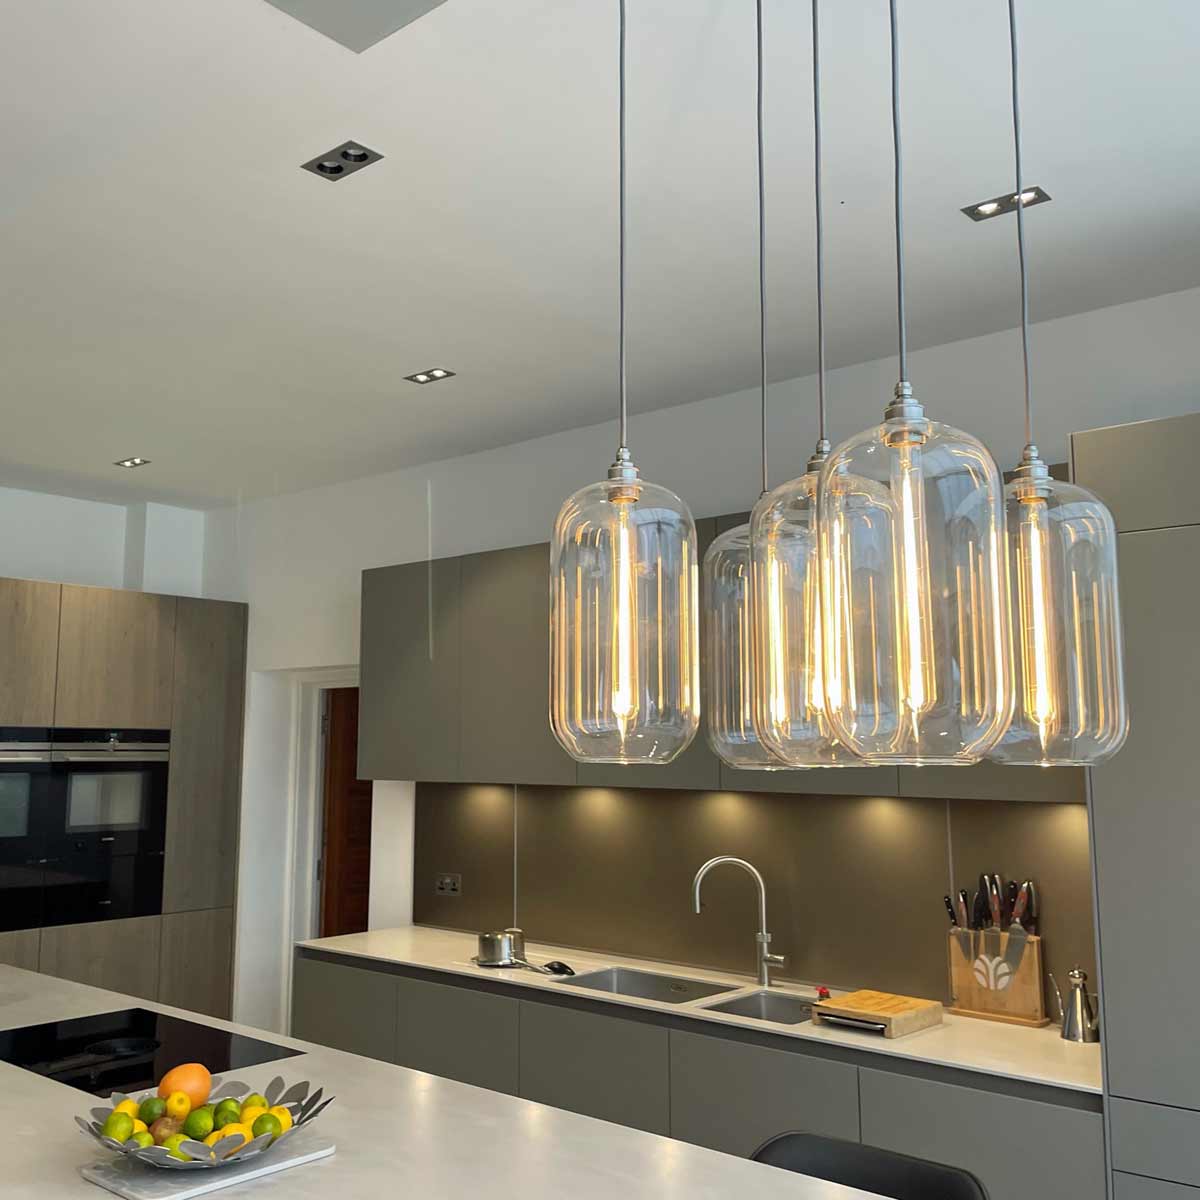 Pendant lights sold by South Charlotte Fine Lighting pictured above a kitchen worktop